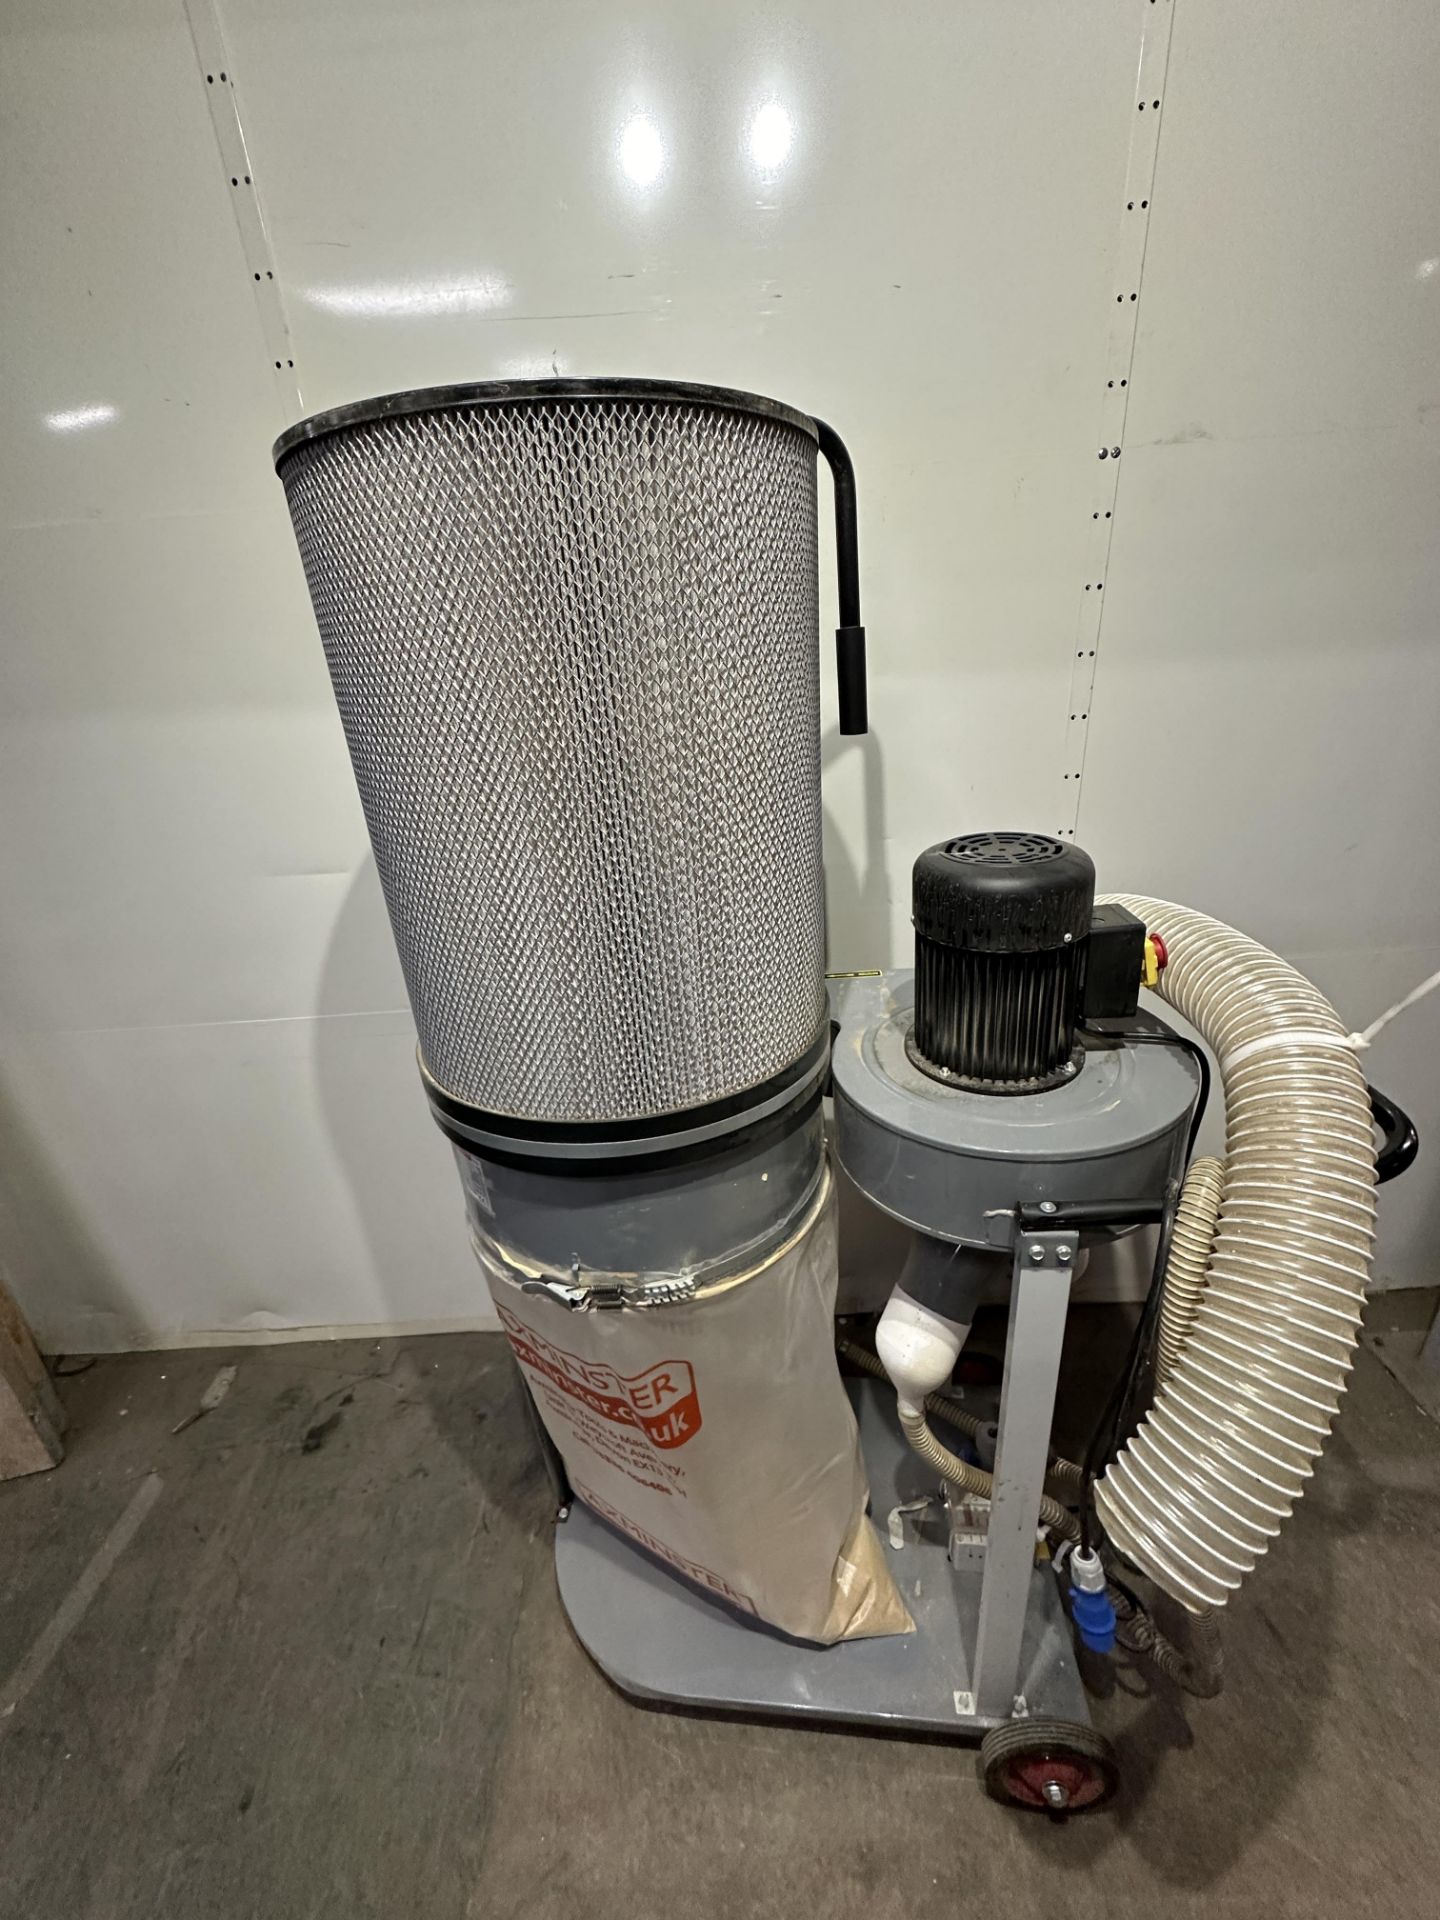 Axminister CT-90HB single bag dust extractor - Image 6 of 6